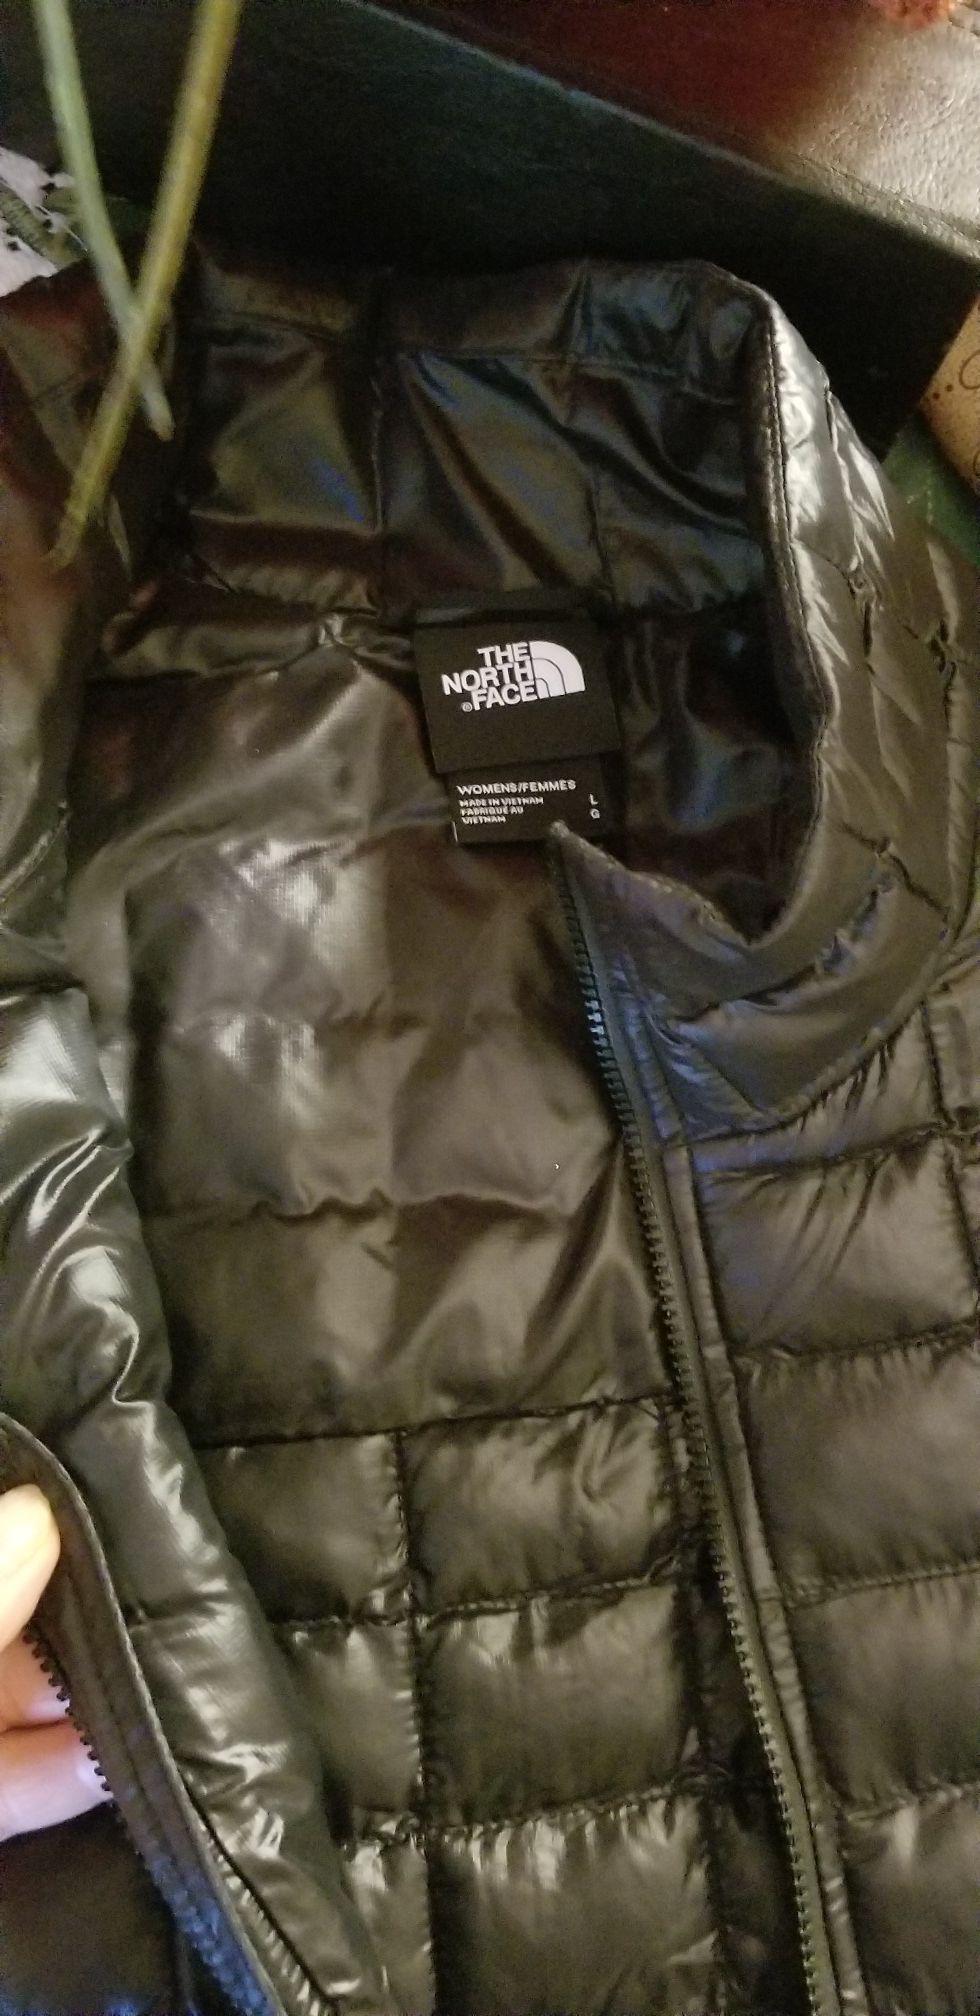 NEW NORTH FACE VEST WITH TAGS!